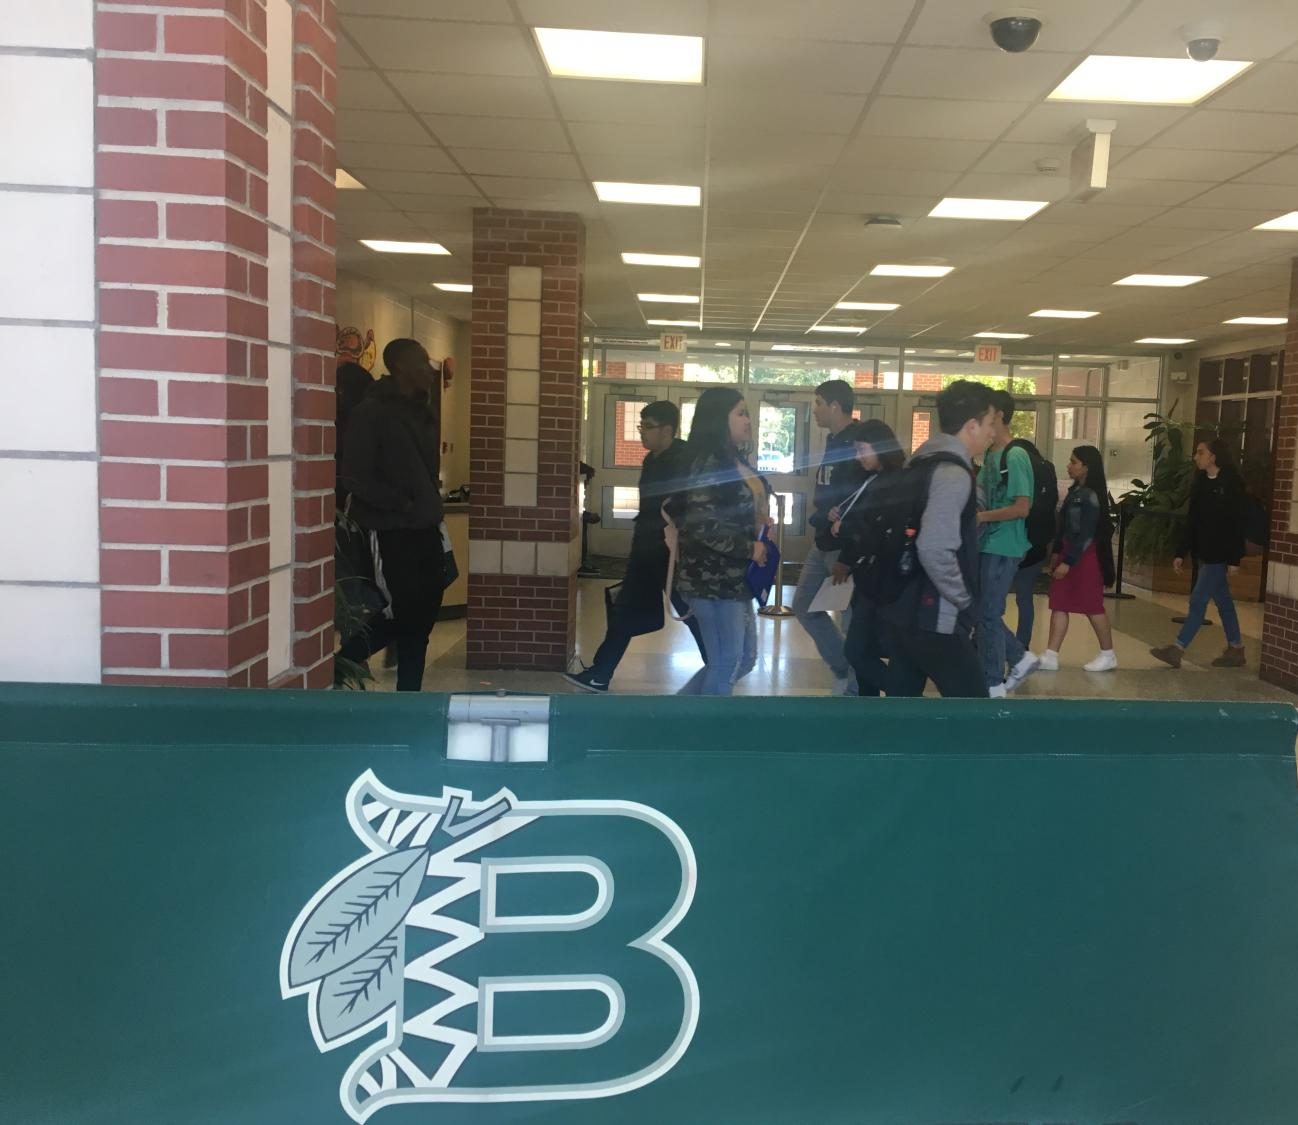 Students take a detour due to a blocked hallway.